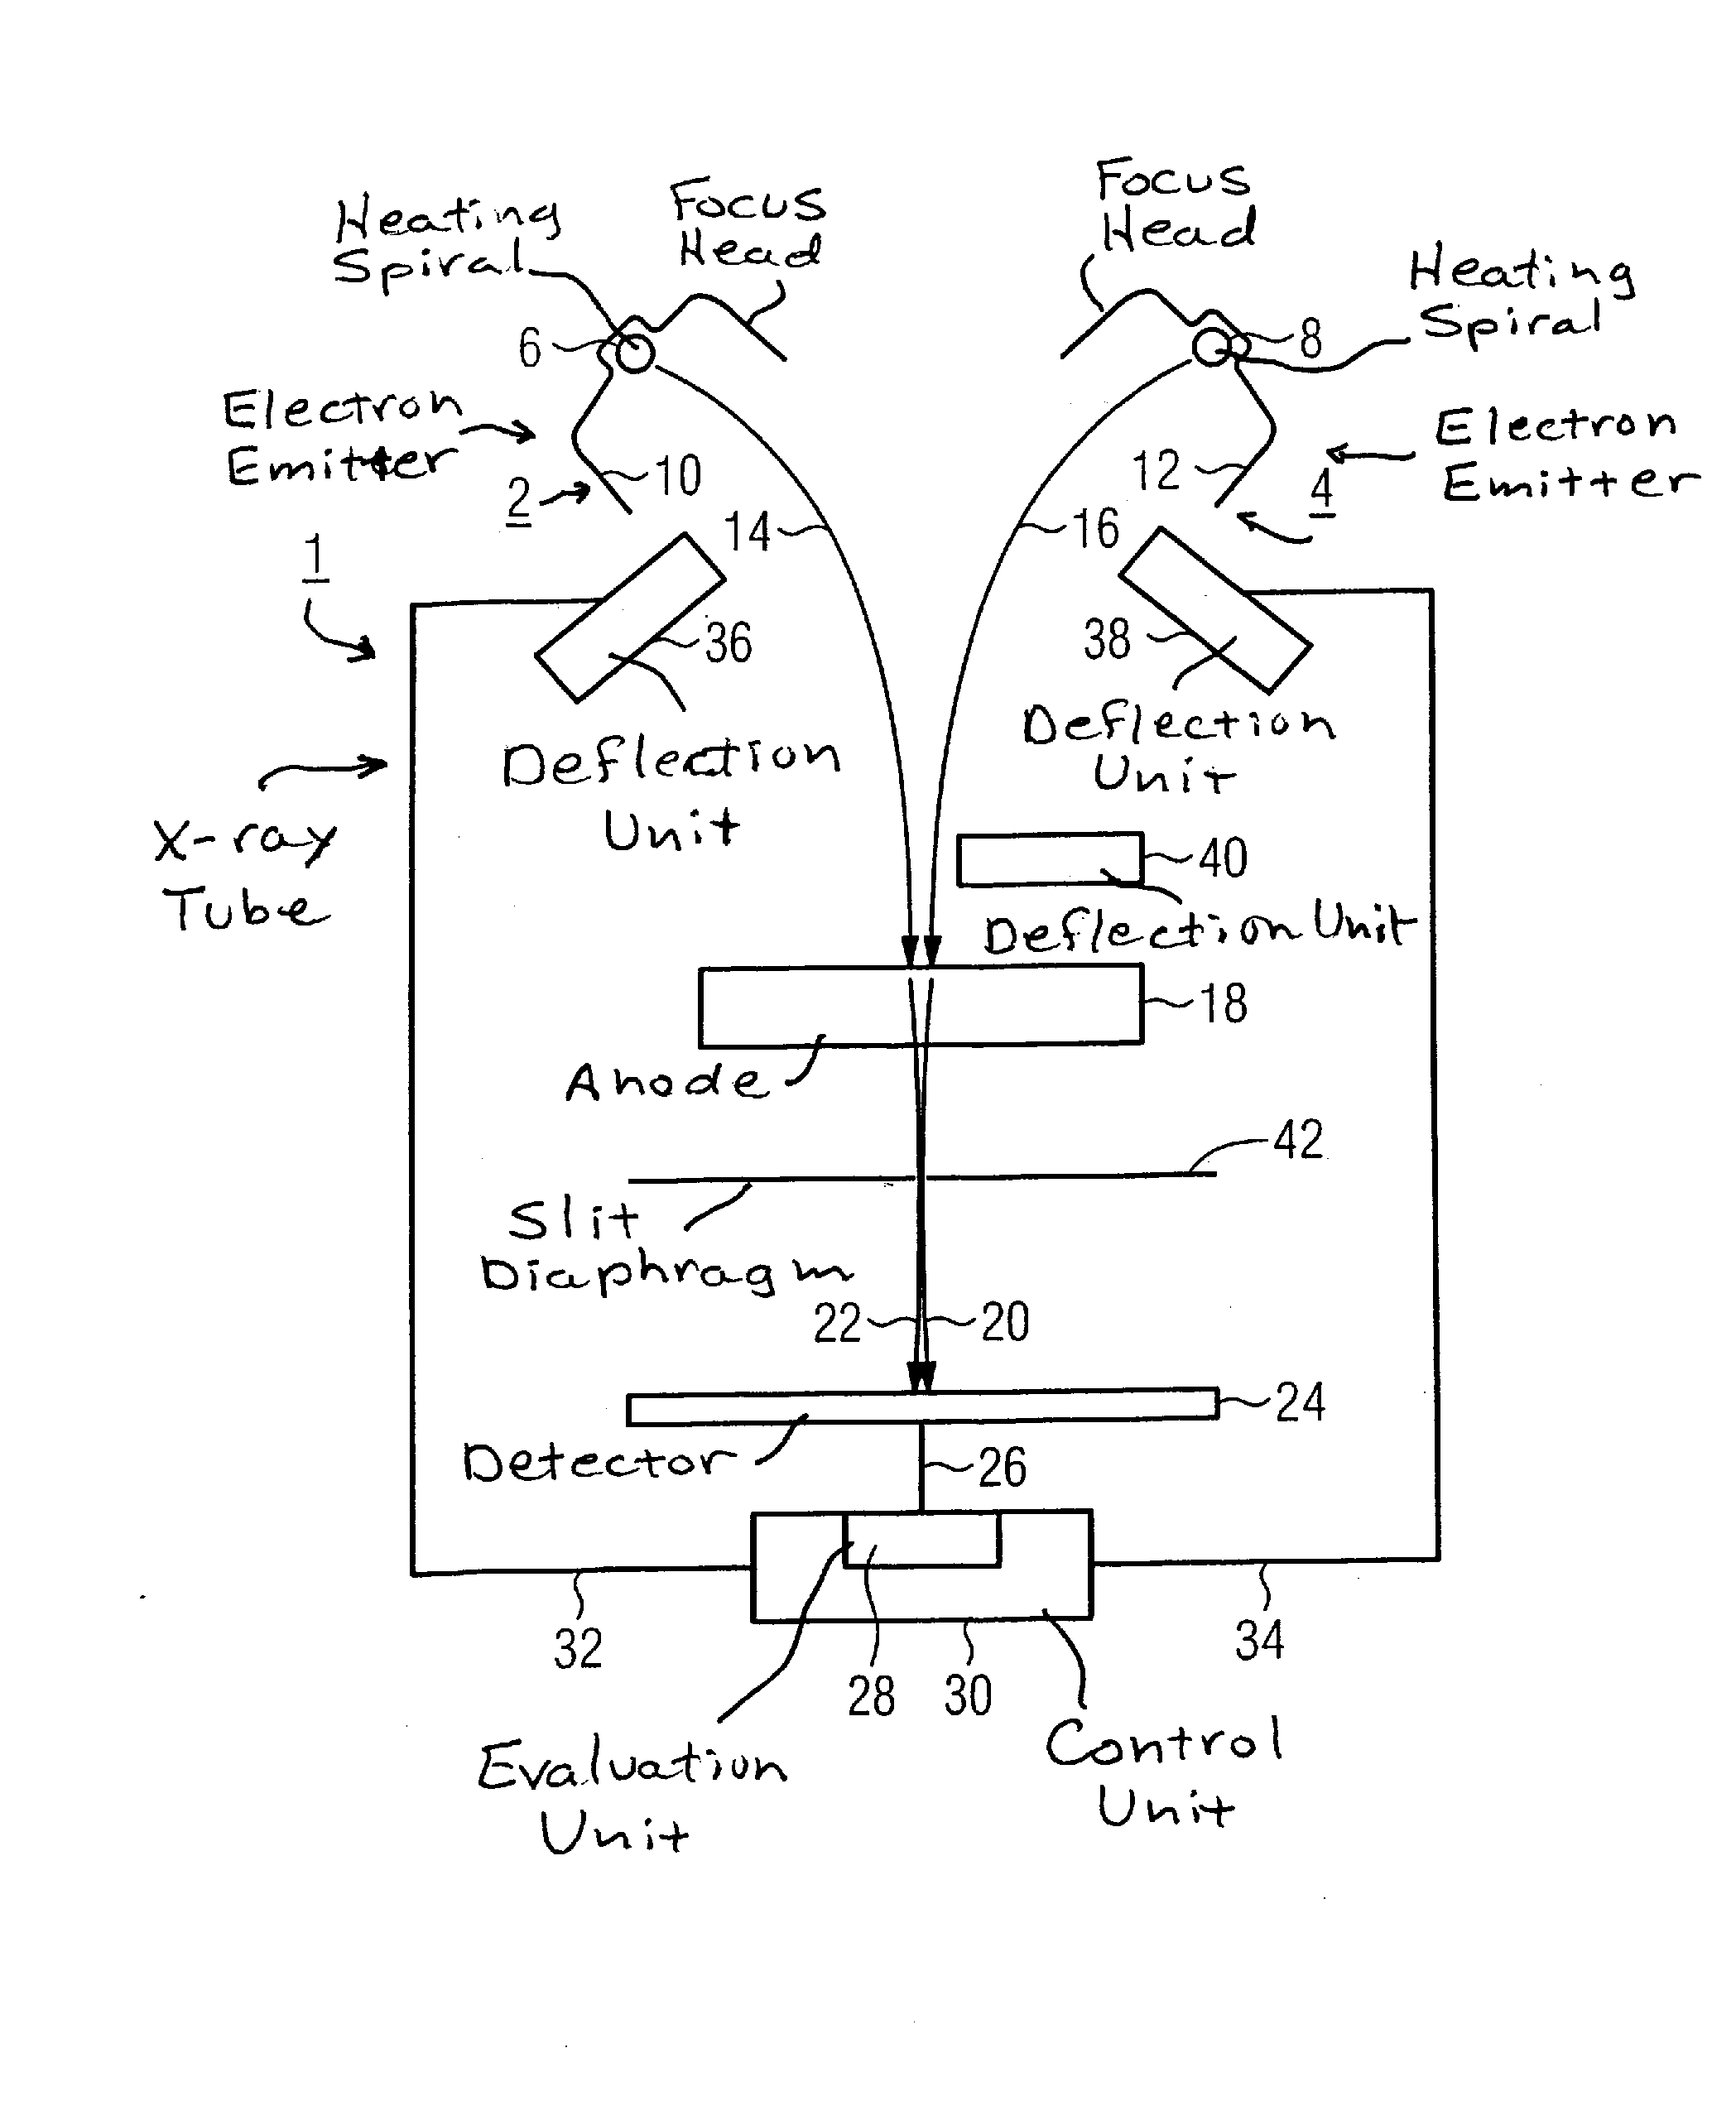 Electron beam controller of an x-ray radiator with two or more electron beams